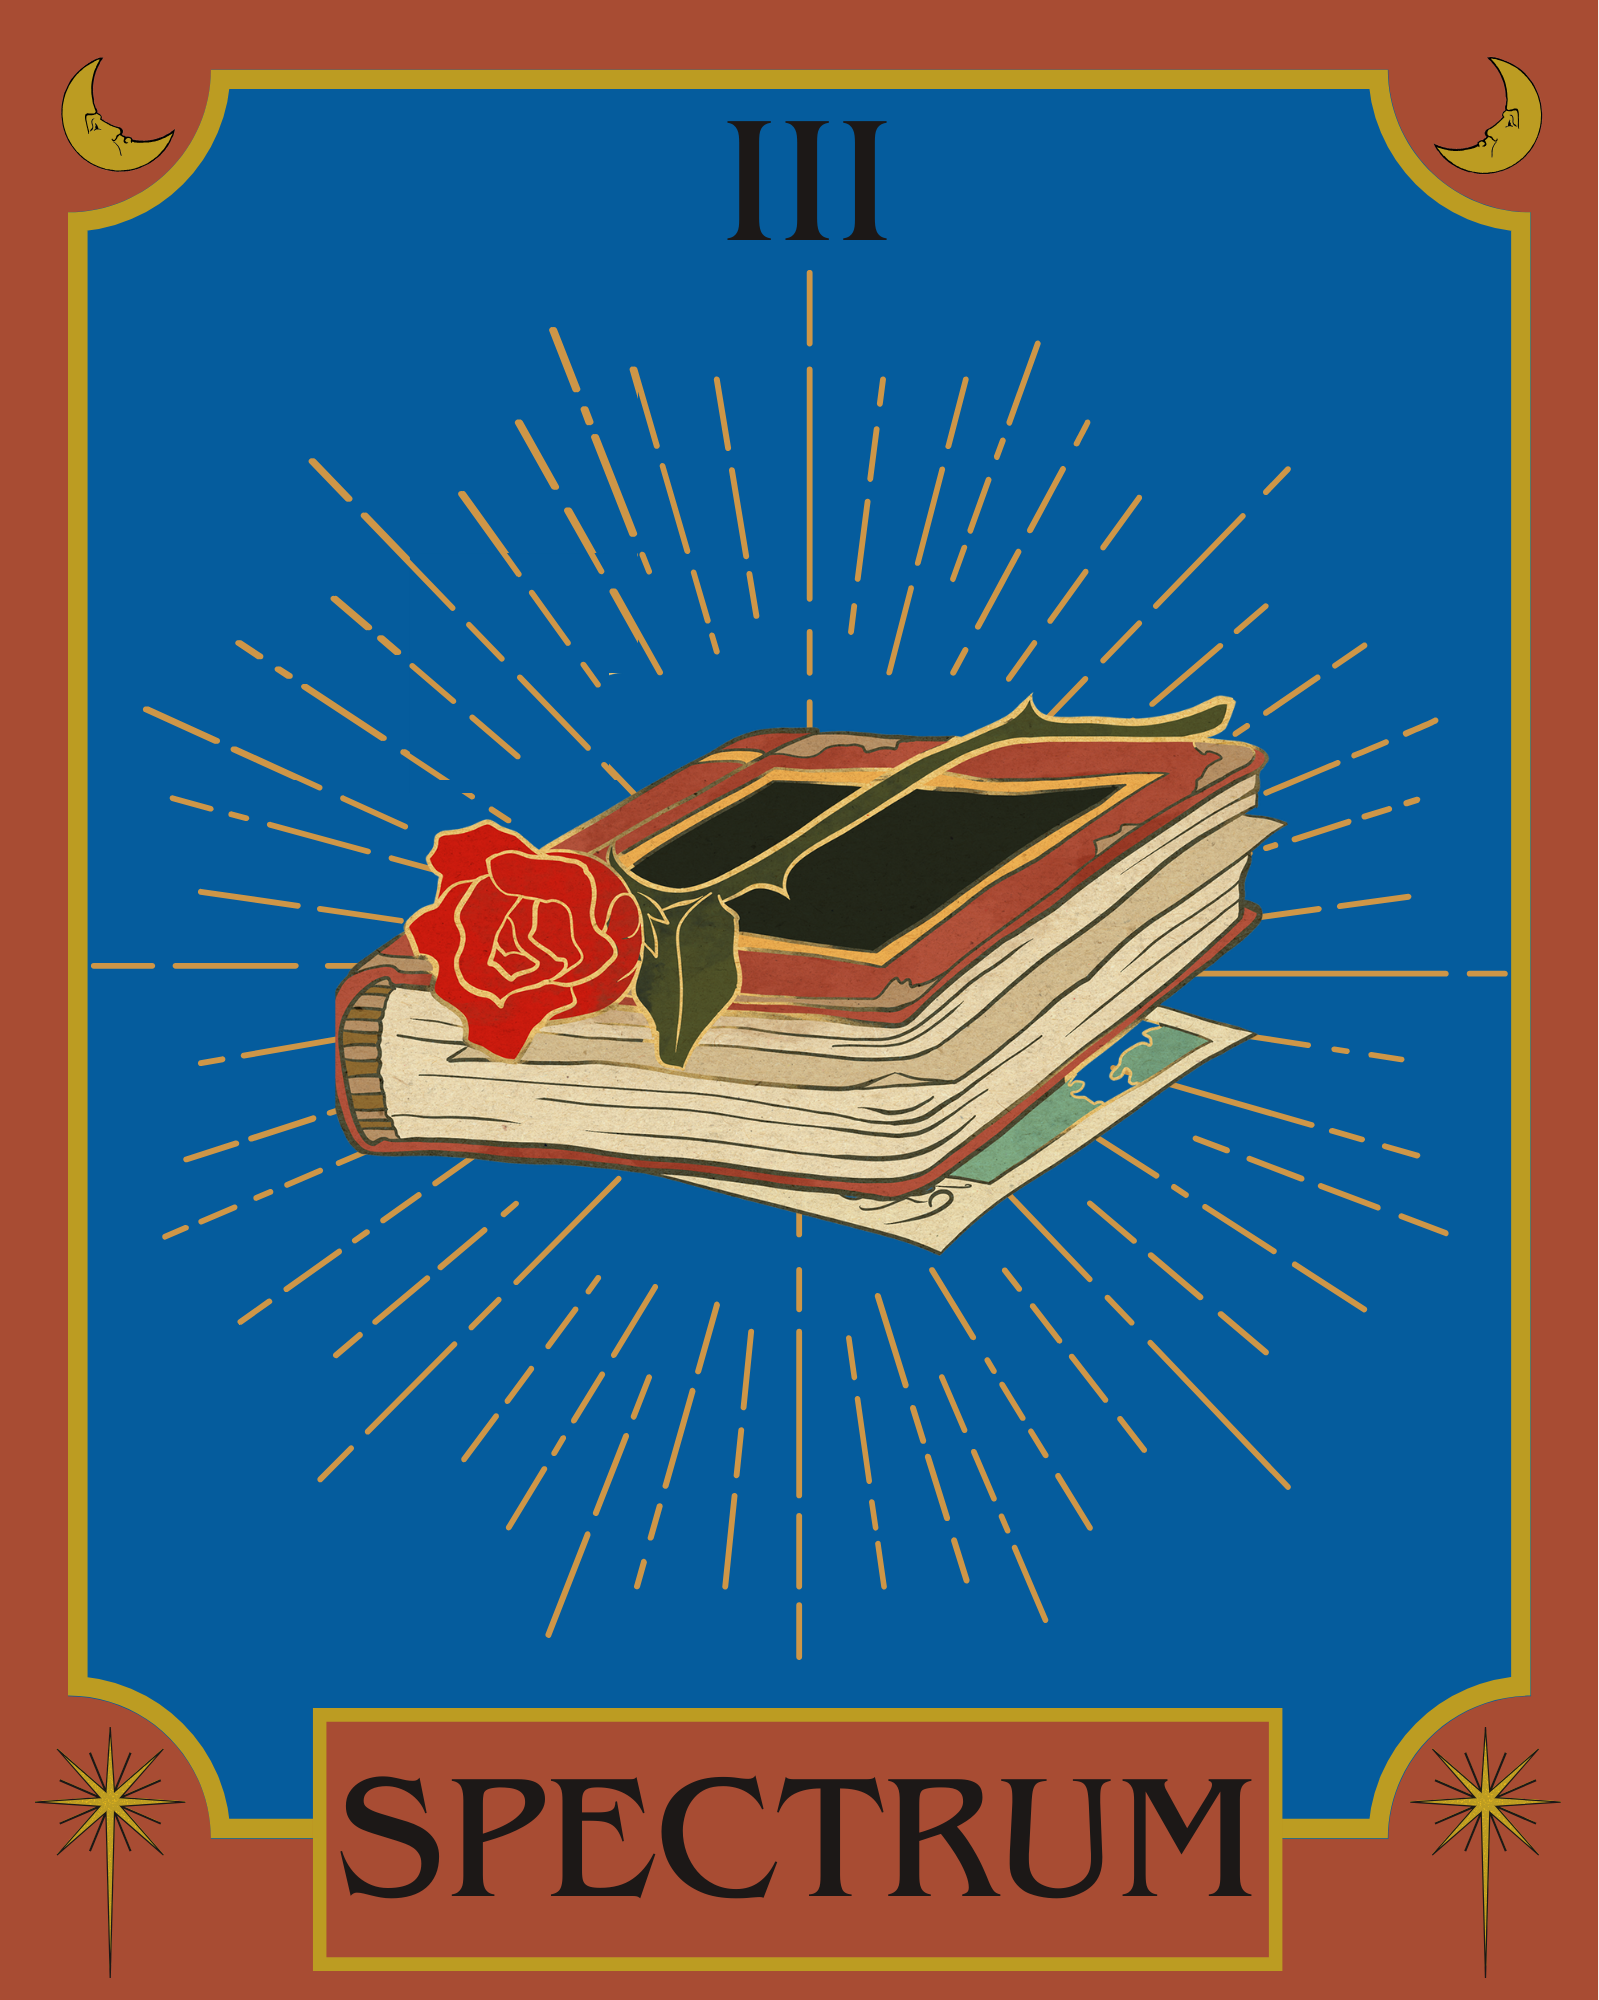 A gold, blue, and dark orange tarot card labelled Spectrum III, with an image of a rose and a book in the centre.